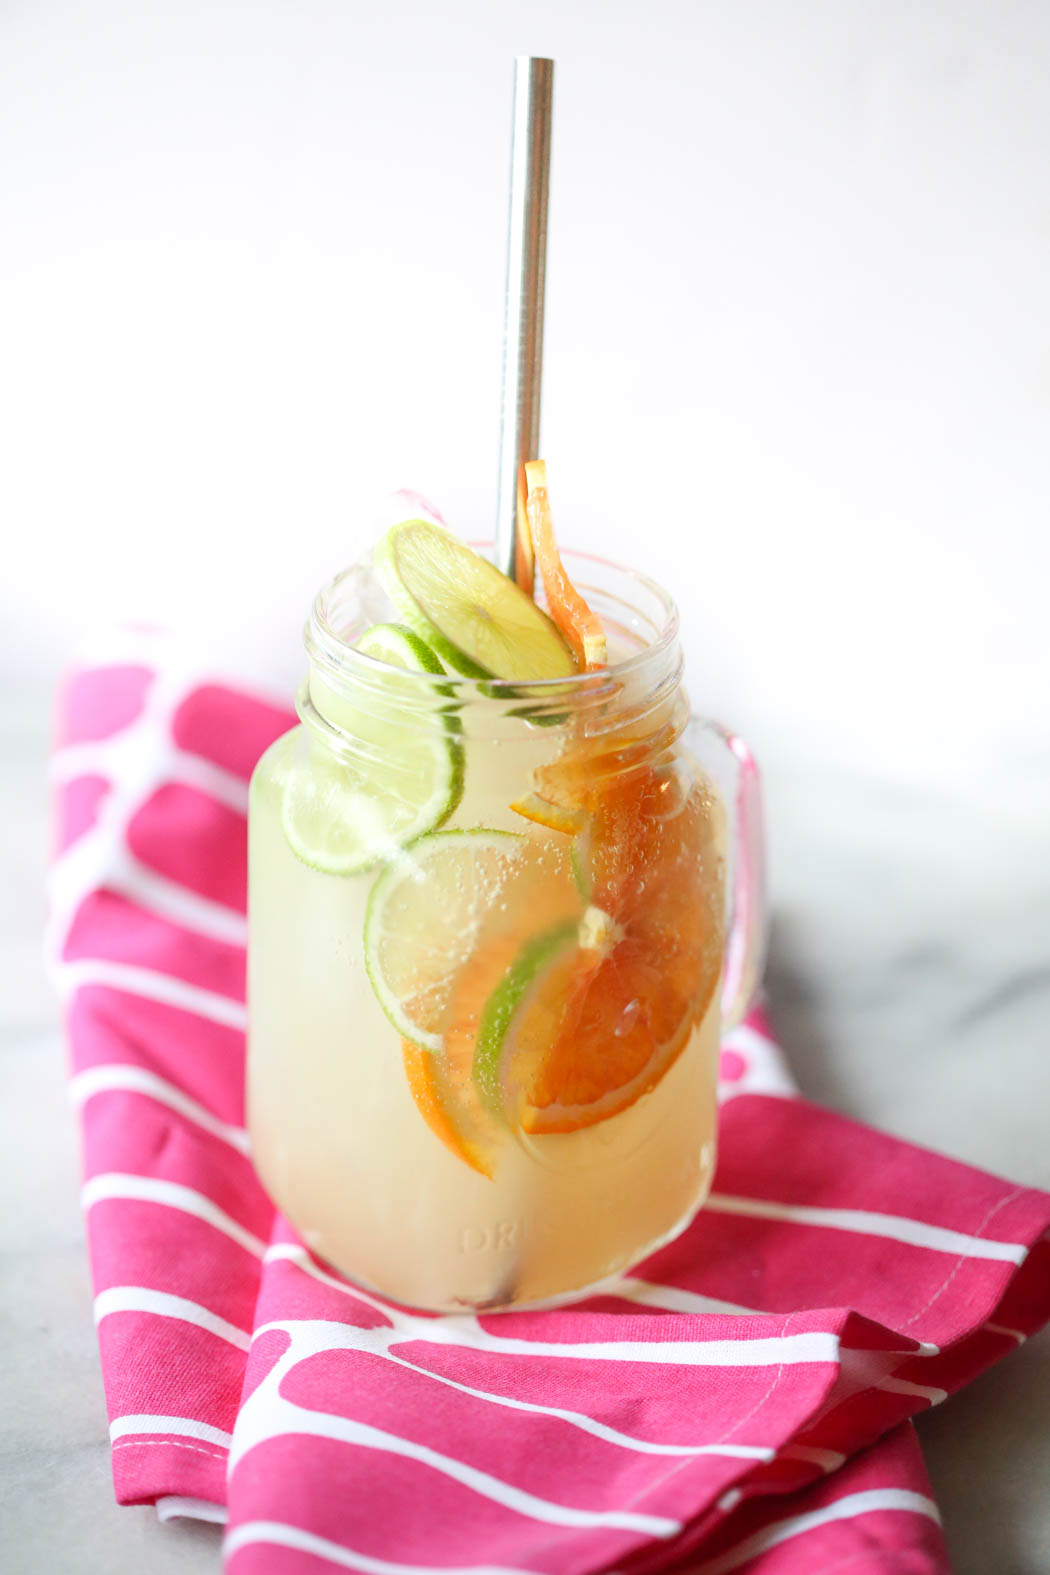 Sparkling Citrus Punch from Our Best Bites